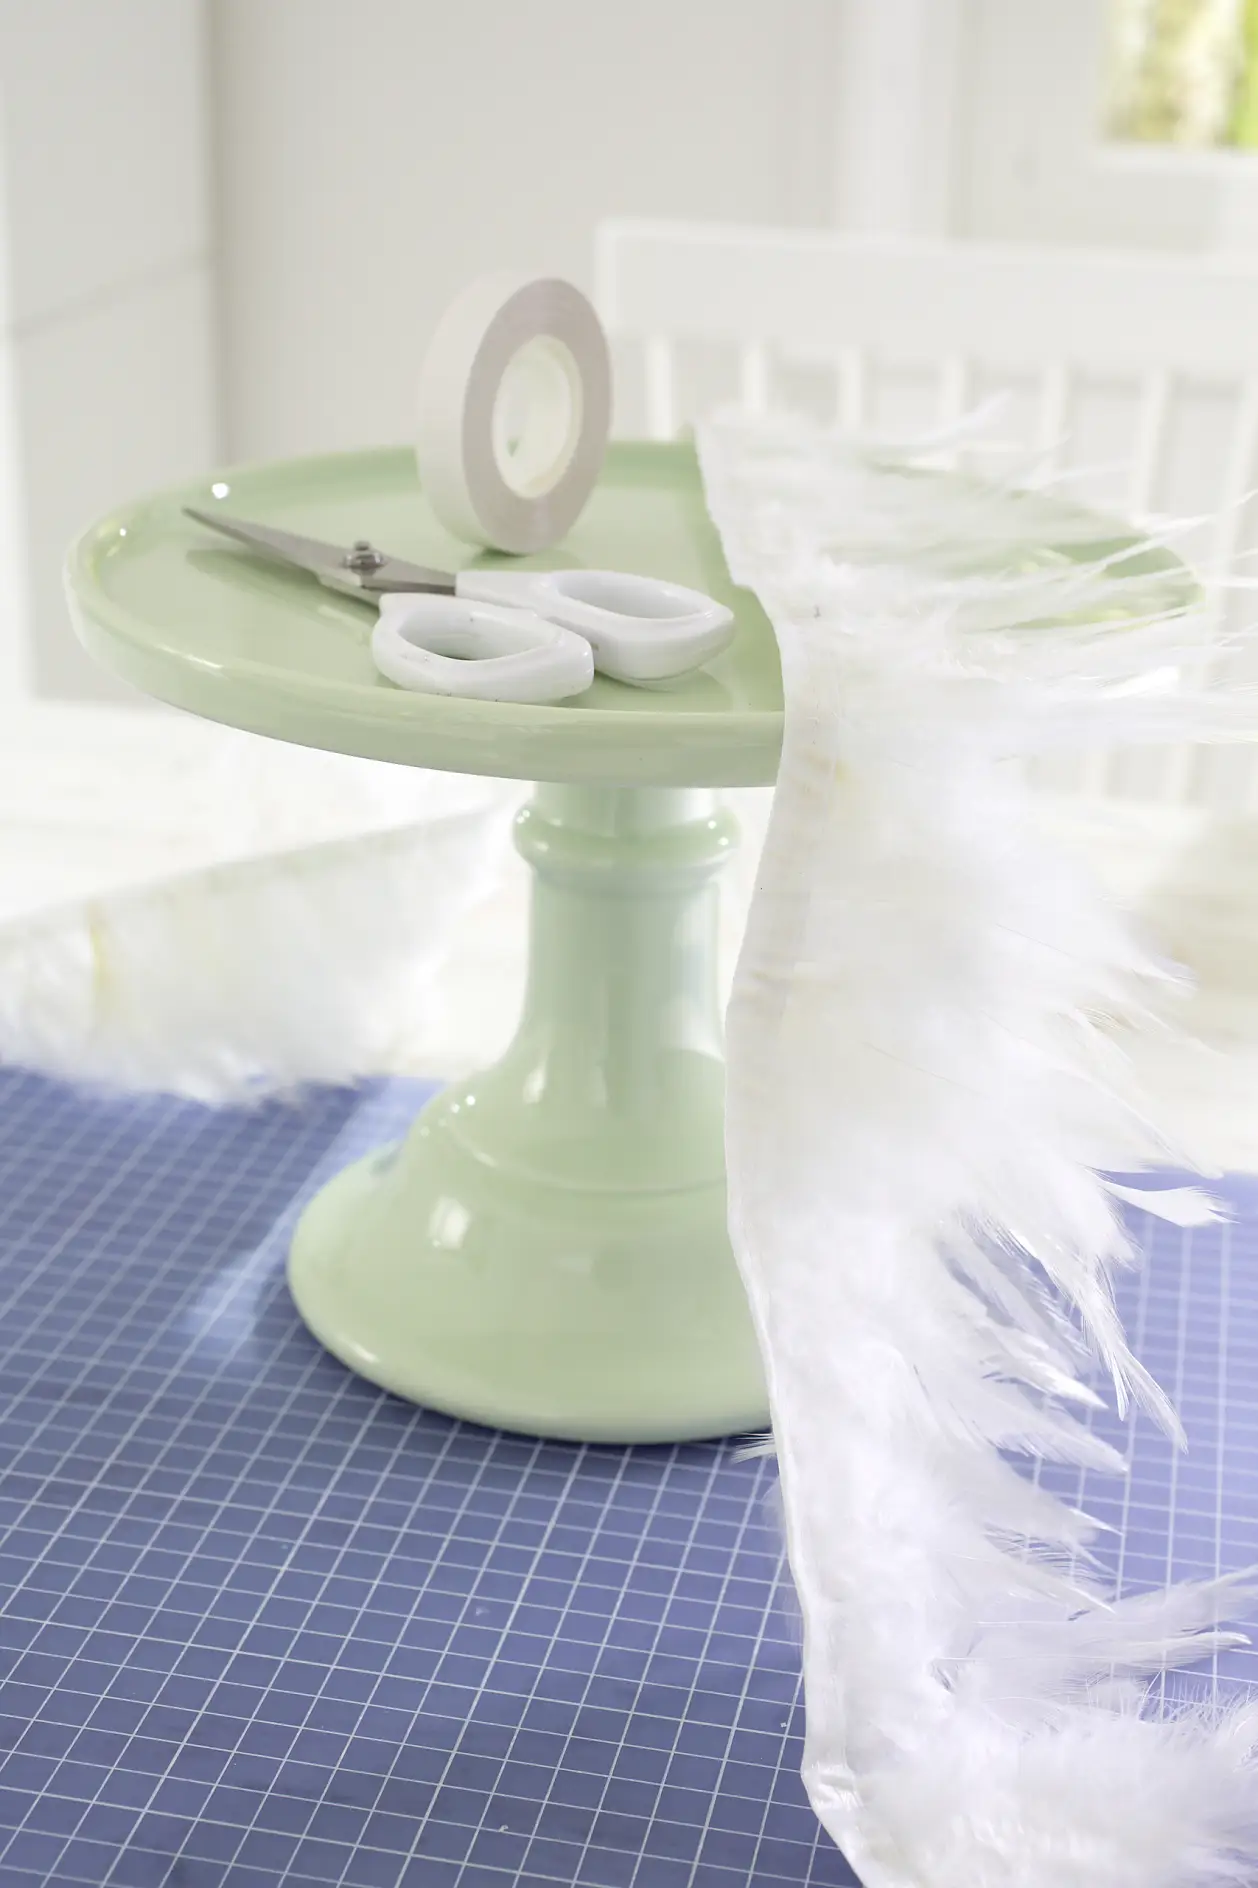 Cake stand, white feather border (length: circumference of the cake stand), scissors, tesa® double-sided adhesive tape